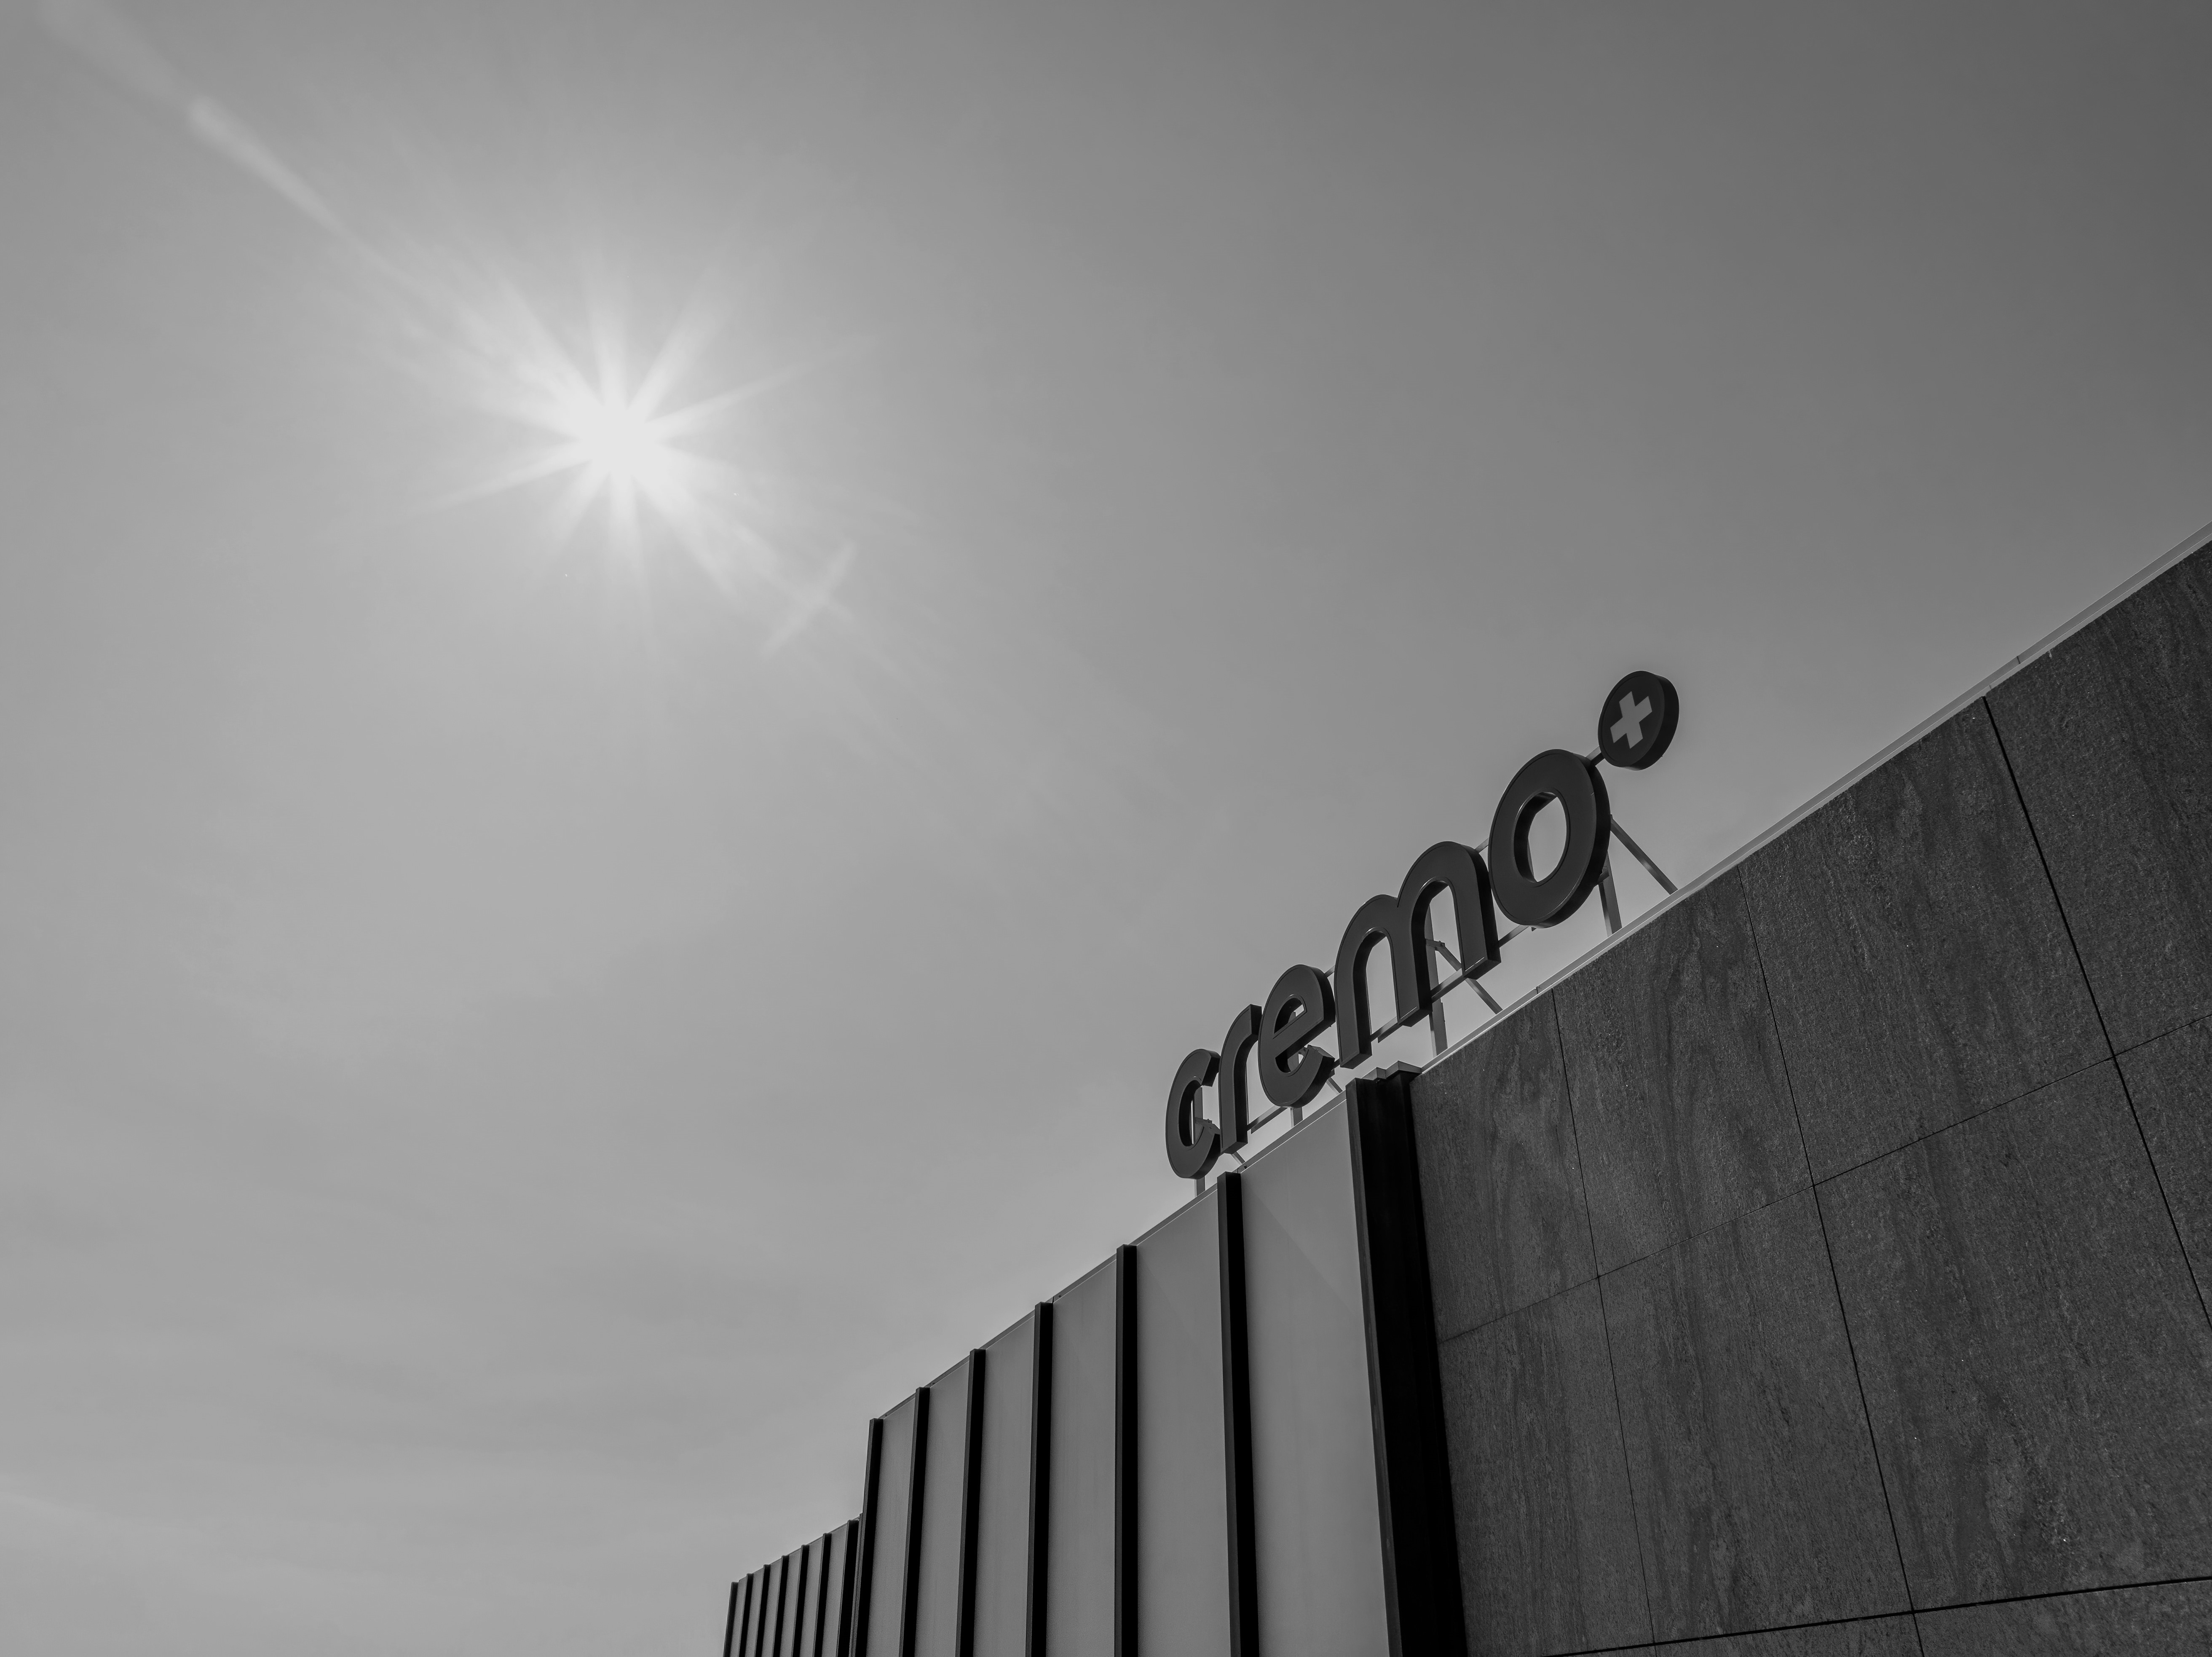 The Cremo logo on their head quarter in a black and white photography